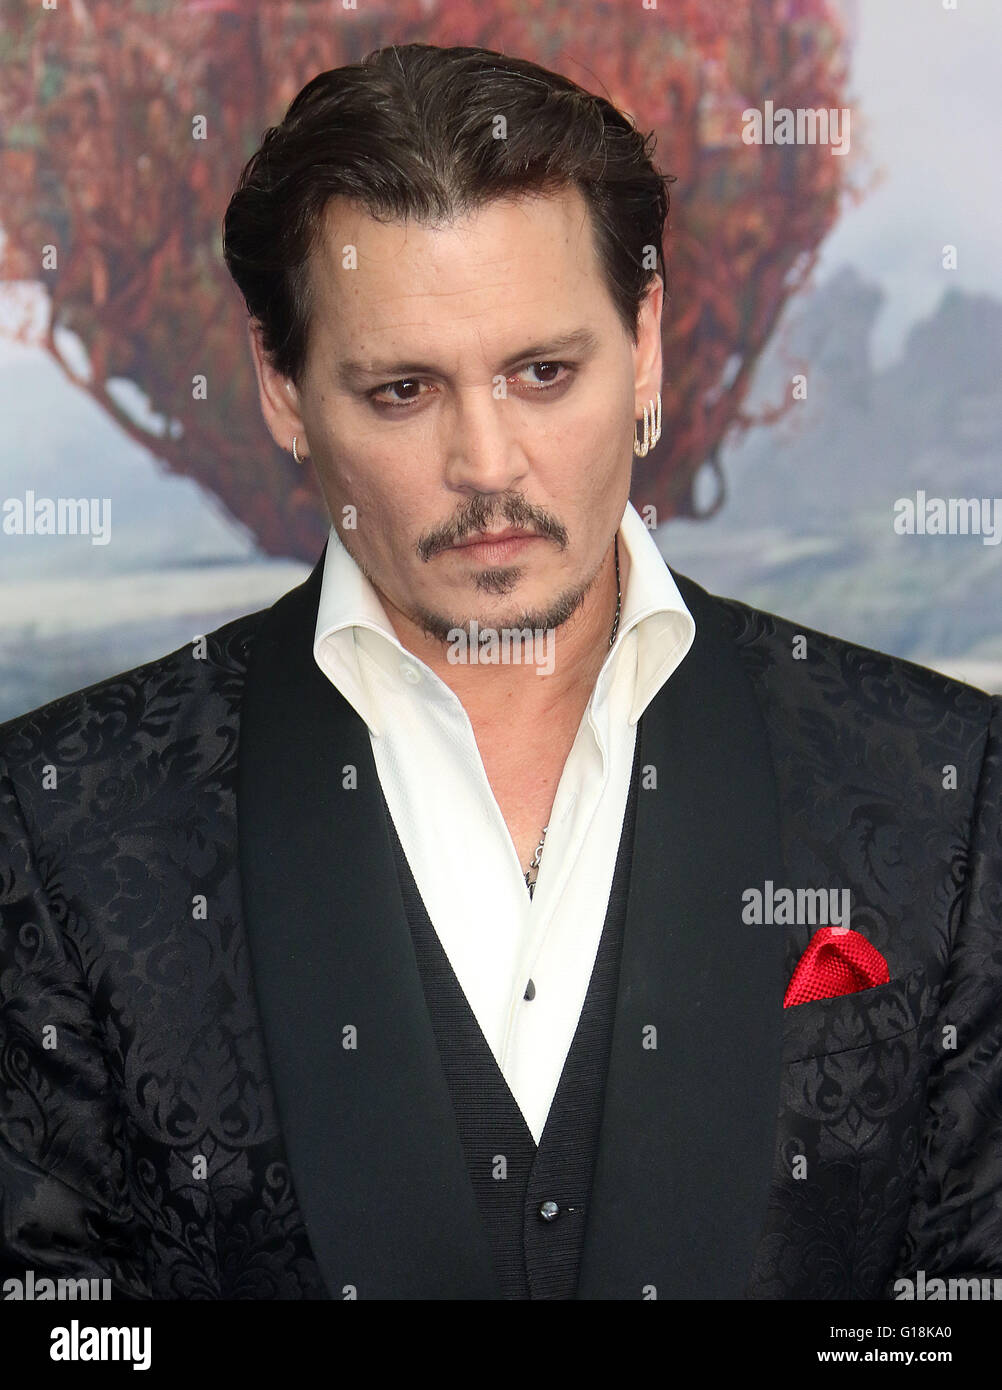 London, UK. 10th May, 2016. Johnny Depp attending 'Alice Through The ...